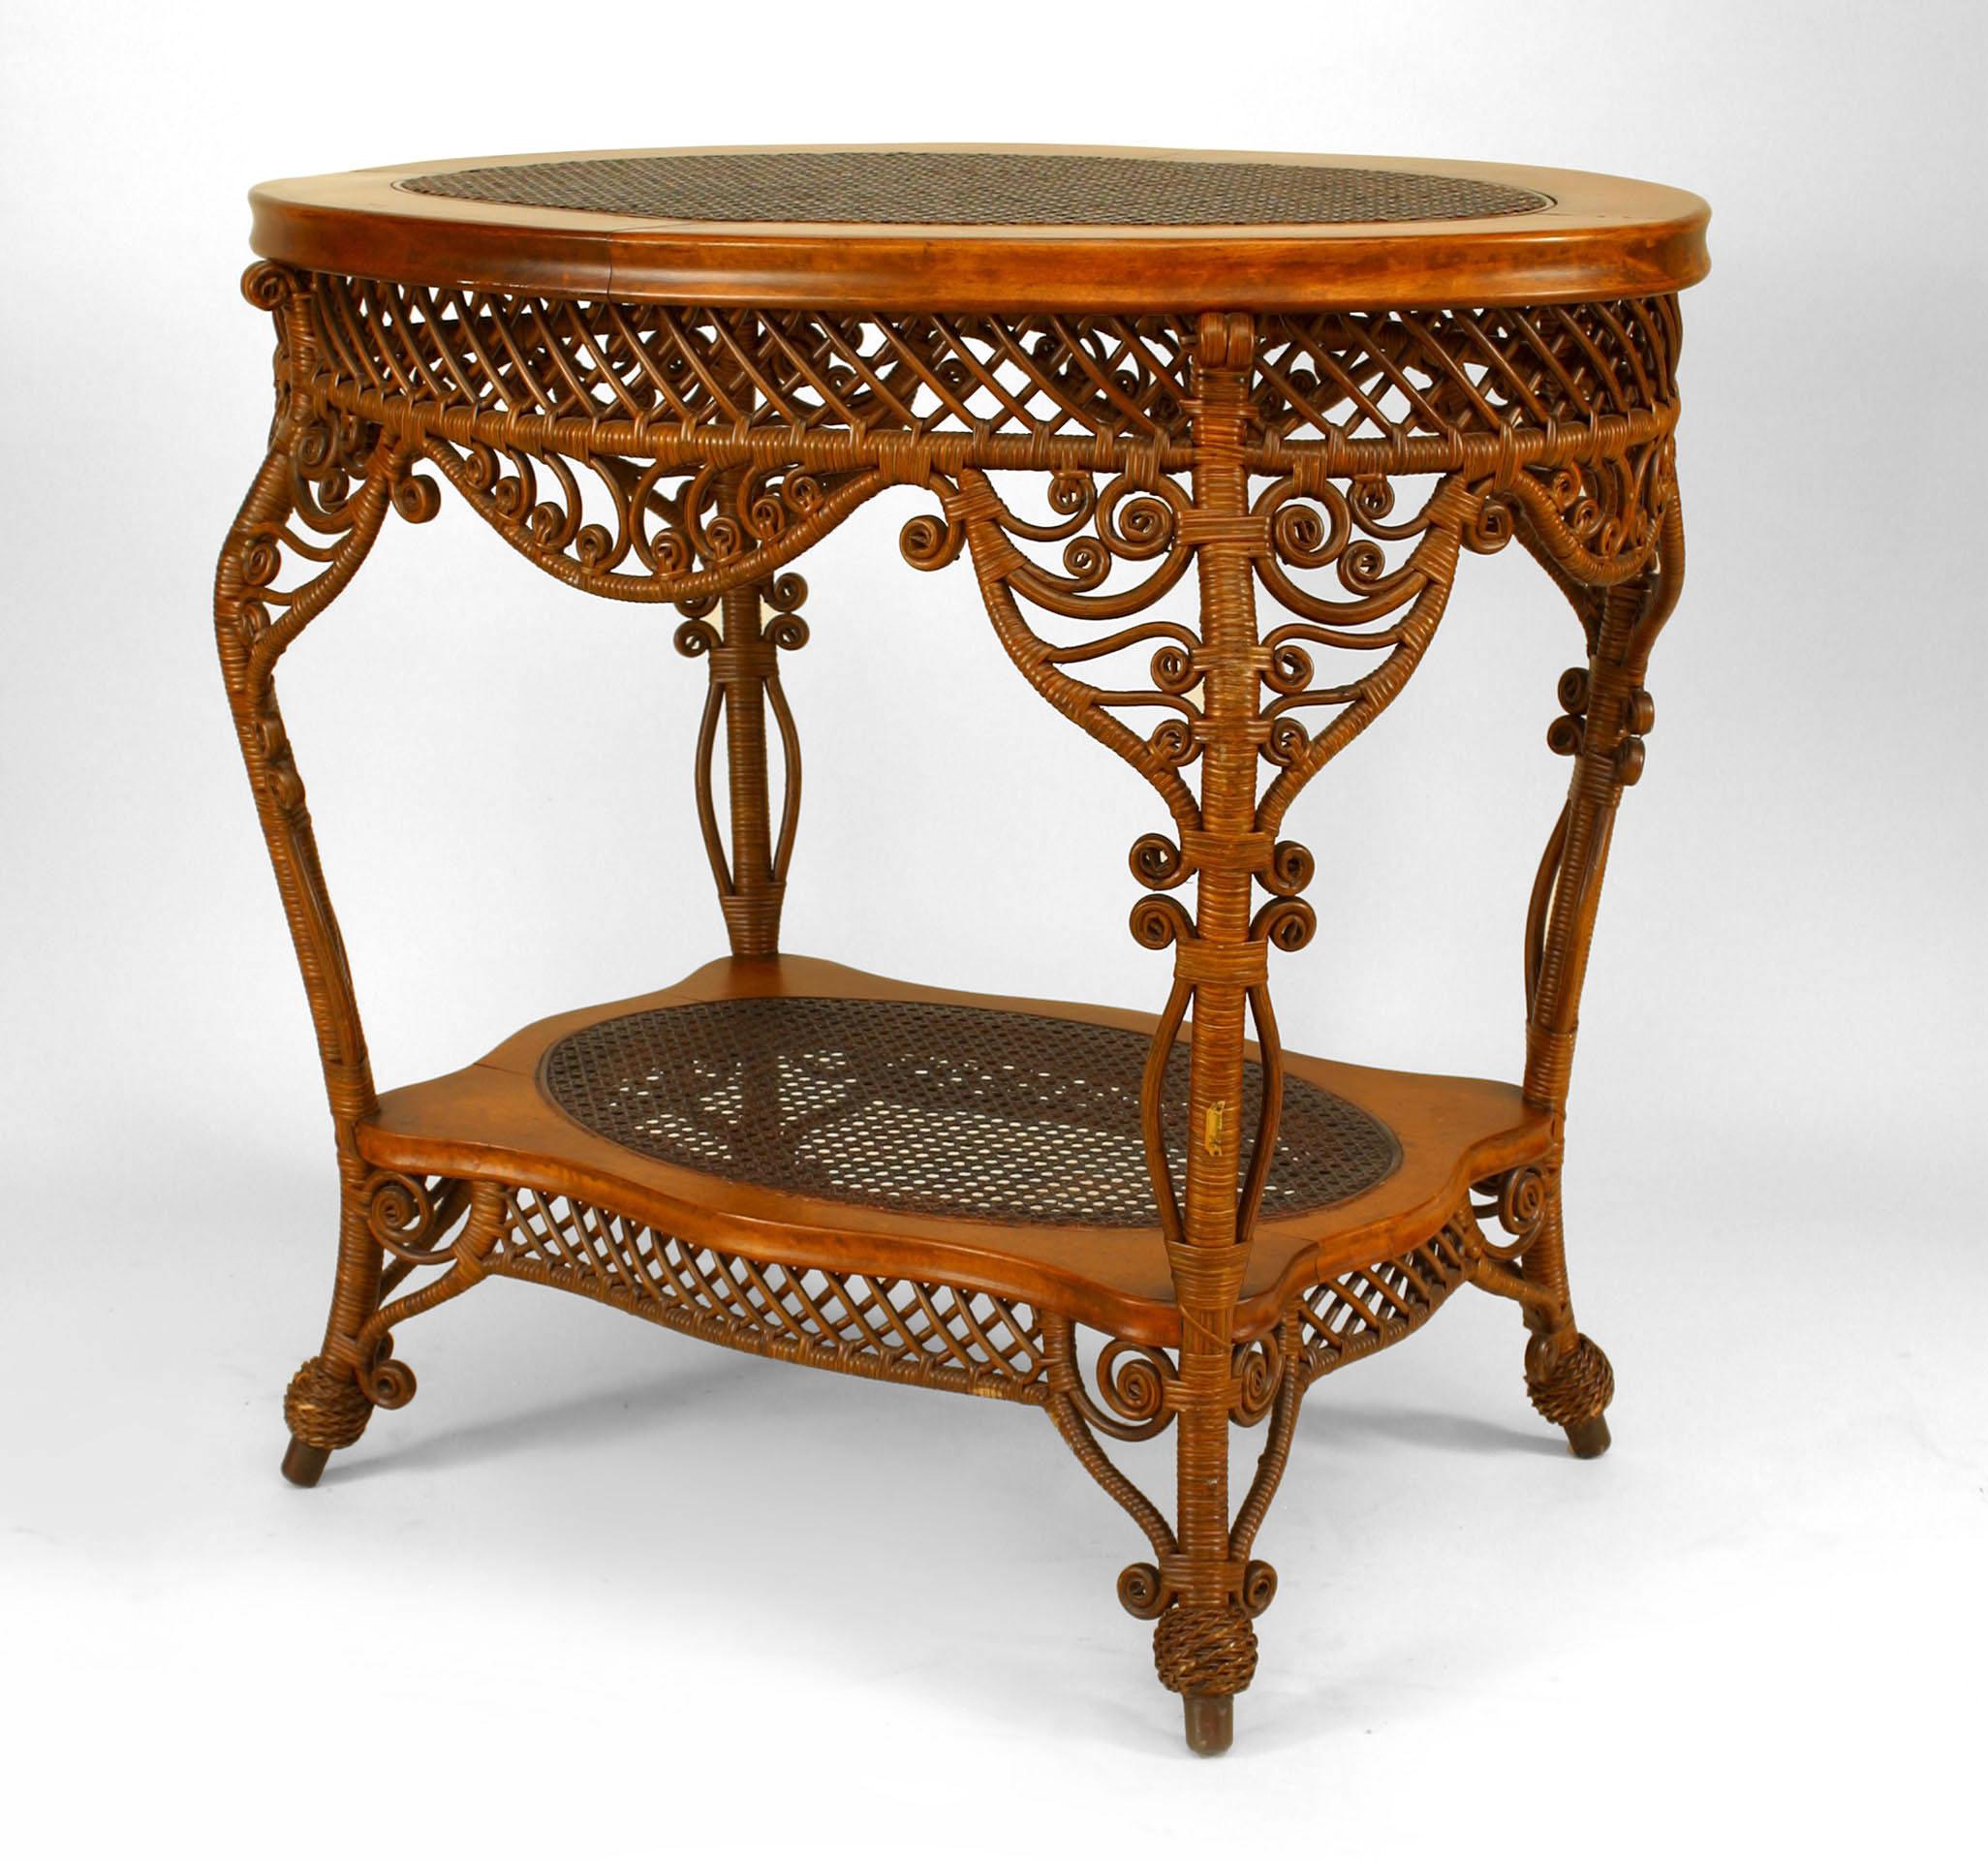 American Victorian natural wicker oval center table with woven top and shelf with filigree & scroll trim apron (HEYWOOD WAKEFIELD paper label).
